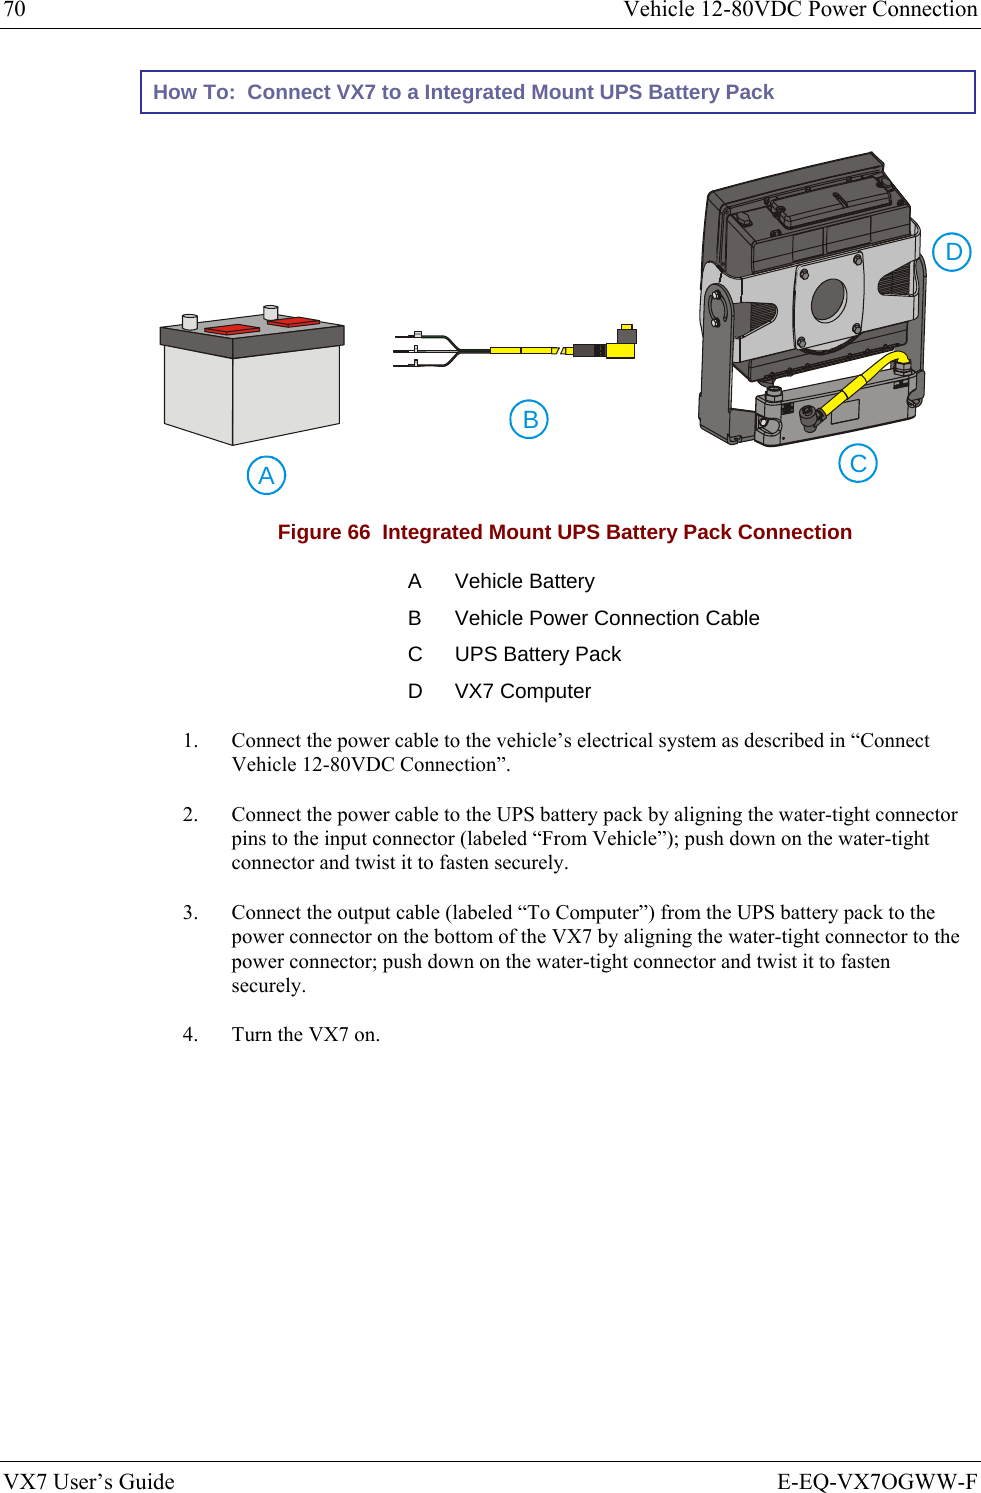 70  Vehicle 12-80VDC Power Connection VX7 User’s Guide  E-EQ-VX7OGWW-F How To:  Connect VX7 to a Integrated Mount UPS Battery Pack    ABGND+-CD Figure 66  Integrated Mount UPS Battery Pack Connection A Vehicle Battery B  Vehicle Power Connection Cable C  UPS Battery Pack D VX7 Computer 1.  Connect the power cable to the vehicle’s electrical system as described in “Connect Vehicle 12-80VDC Connection”. 2.  Connect the power cable to the UPS battery pack by aligning the water-tight connector pins to the input connector (labeled “From Vehicle”); push down on the water-tight connector and twist it to fasten securely. 3.  Connect the output cable (labeled “To Computer”) from the UPS battery pack to the power connector on the bottom of the VX7 by aligning the water-tight connector to the power connector; push down on the water-tight connector and twist it to fasten securely. 4.  Turn the VX7 on.  